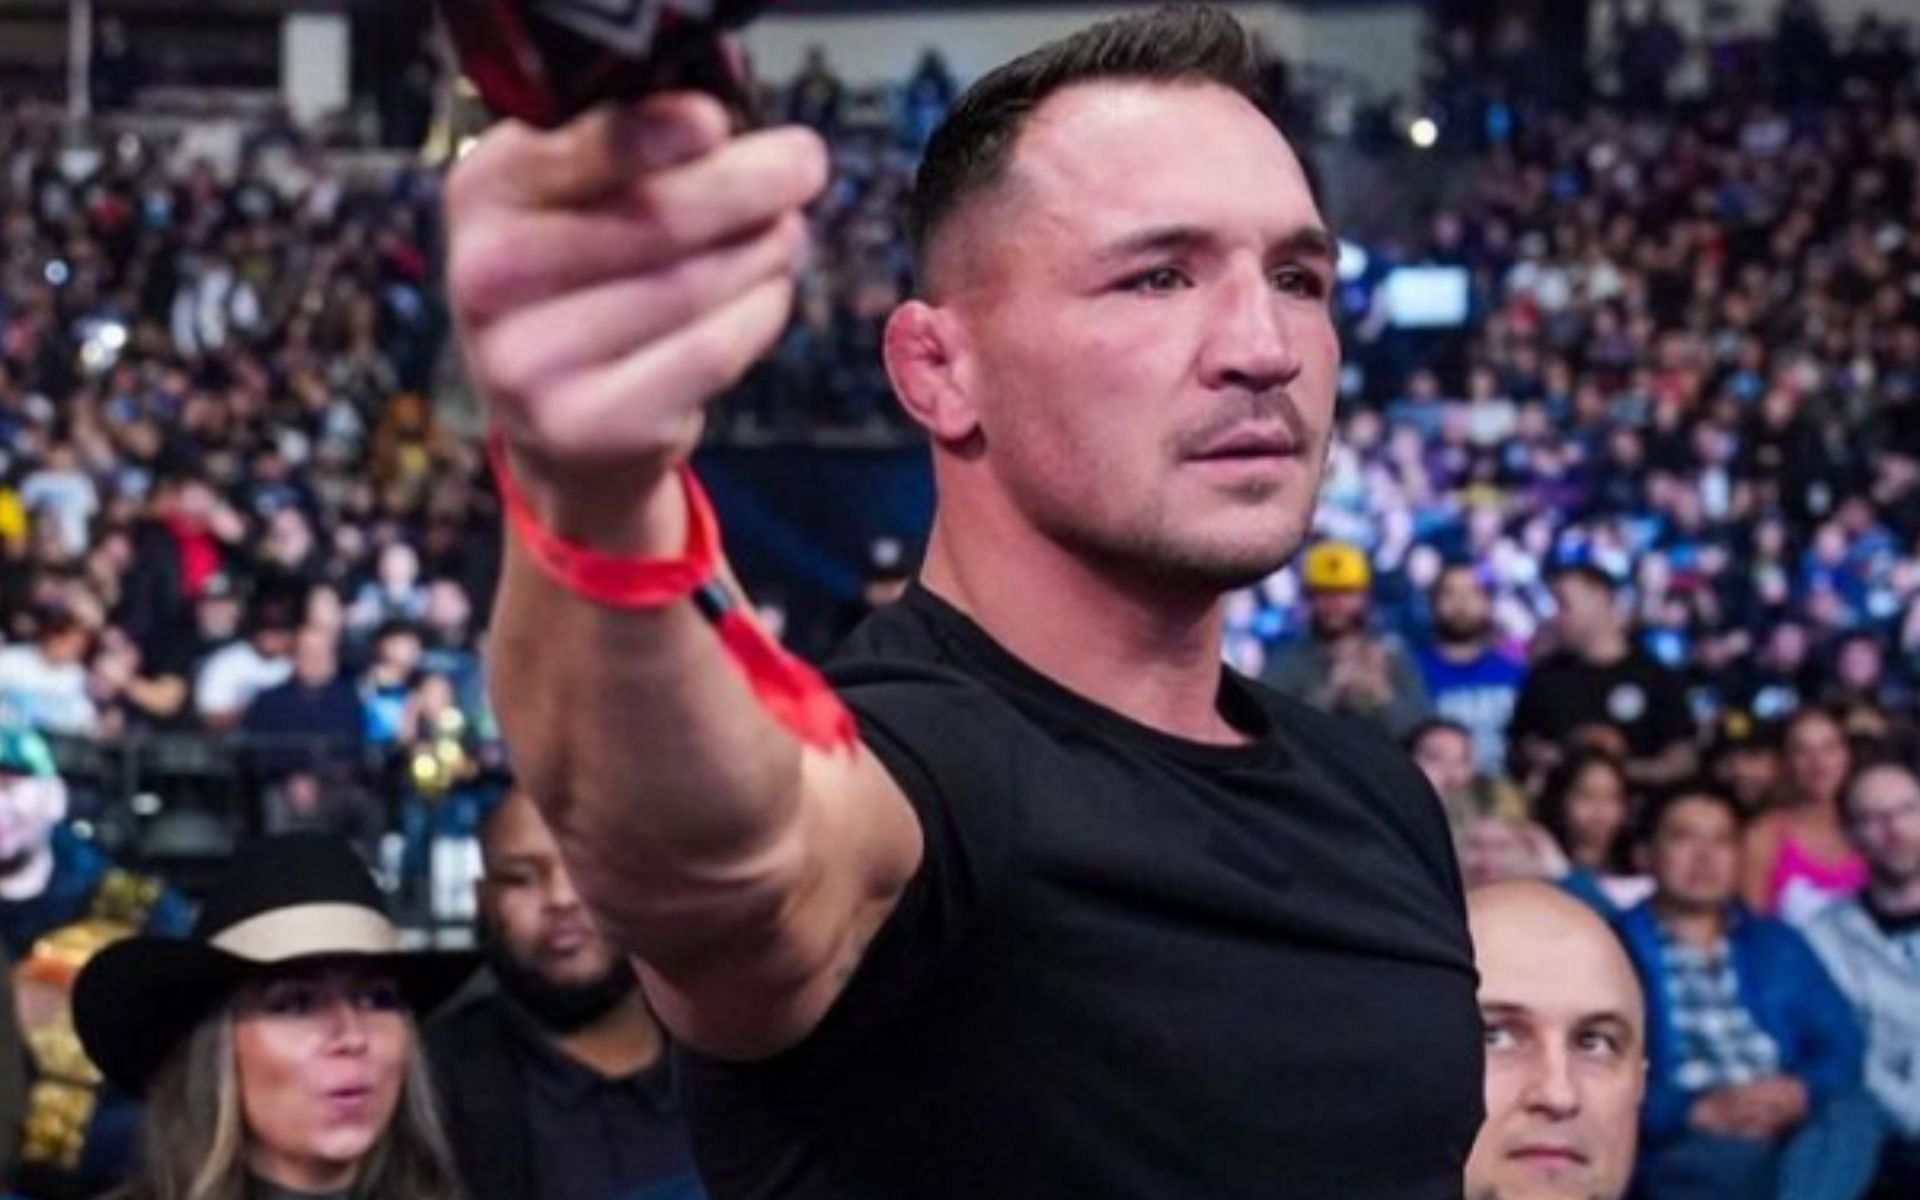 Michael Chandler is expected to face Conor McGregor this summer. [Image via @MikeChandlermma on Instagram]